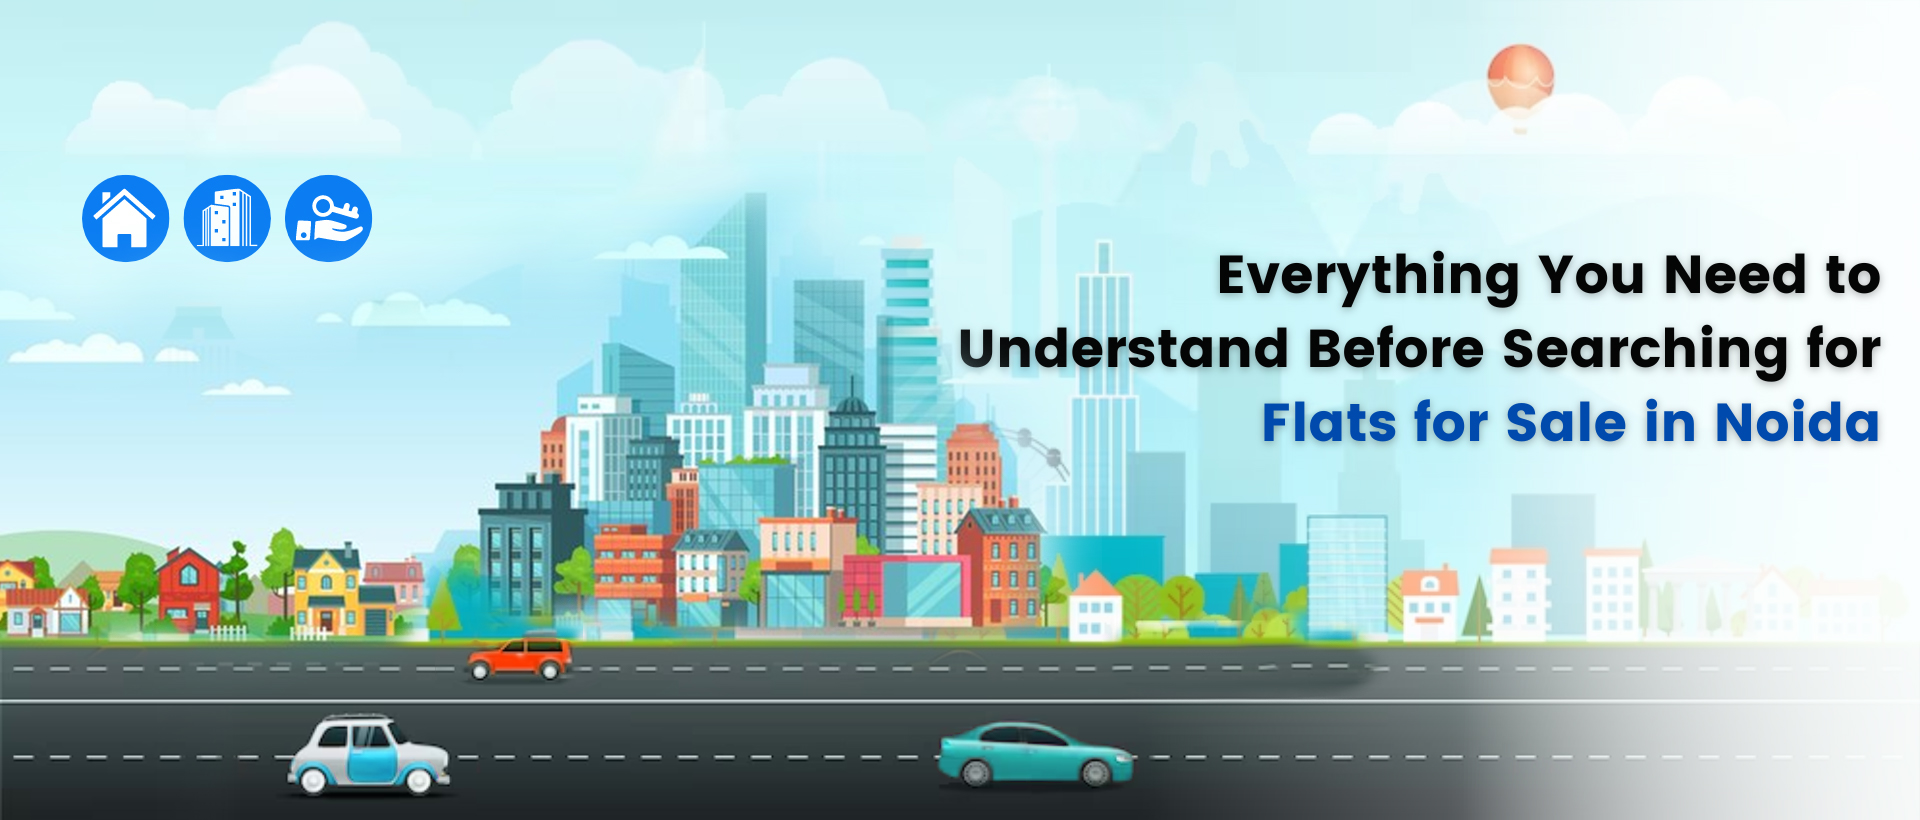 Everything you need to understand before searching for flats for sale in noida